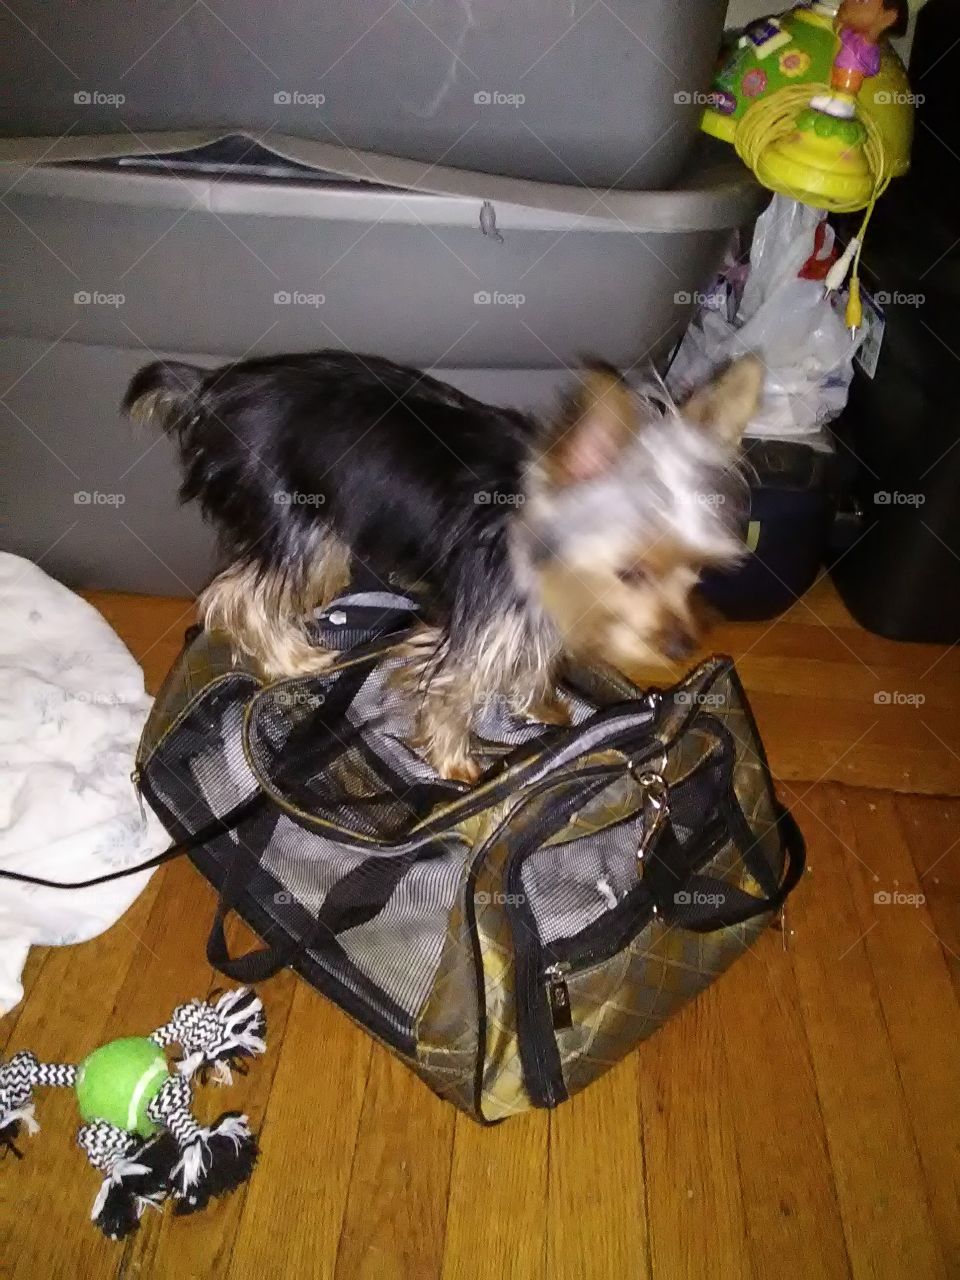 a tea cup Yorkie named trove who loves to stand on his Carrier bag because he knows he's getting ready to go on a adventure